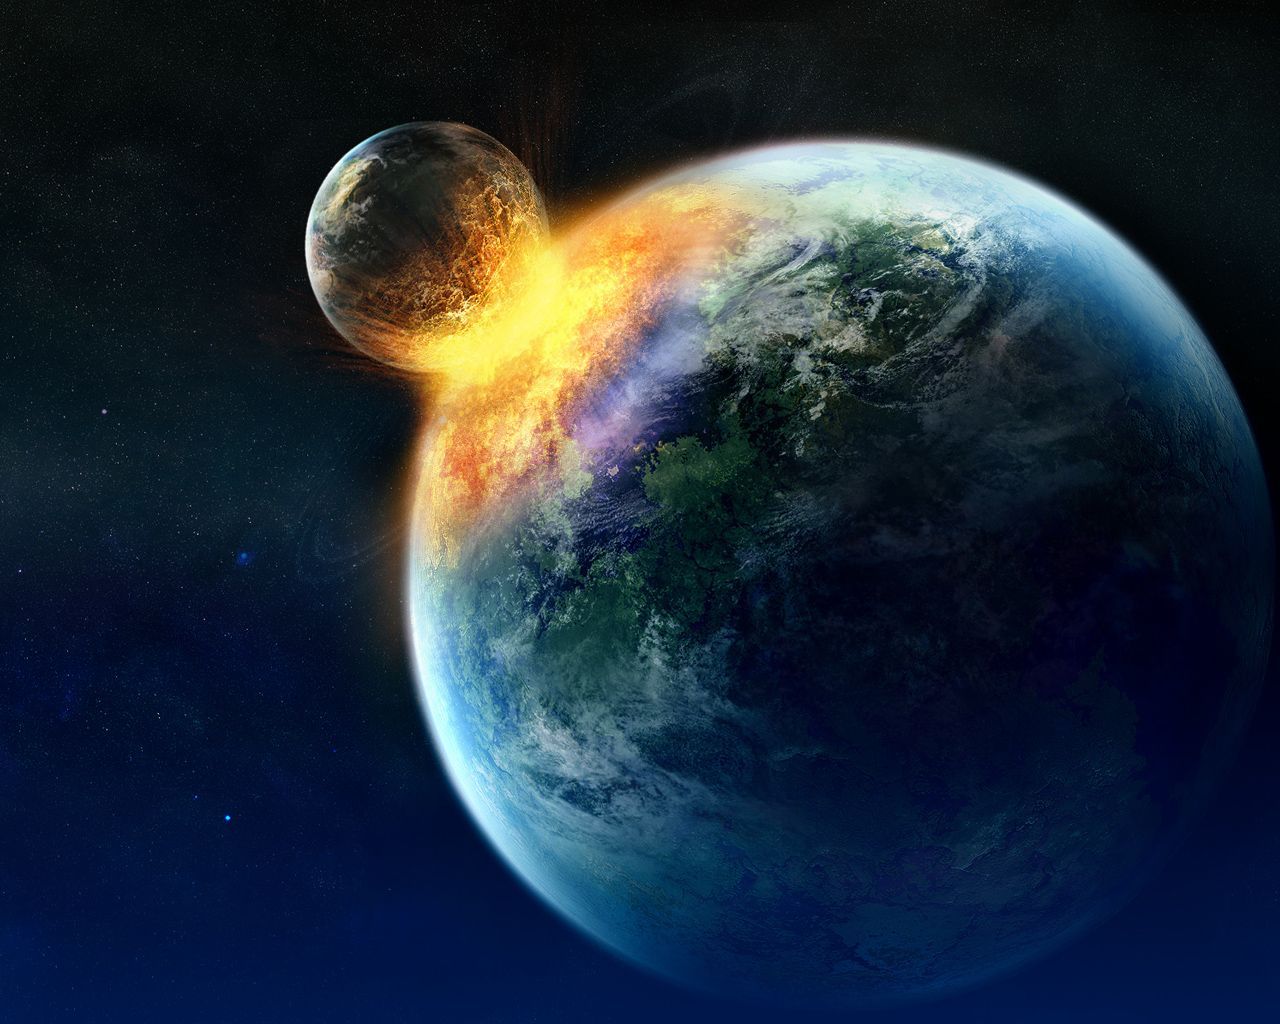 Full HD Wallpapers + Blue, Space, Planets, Apocalypse, Collisions ...